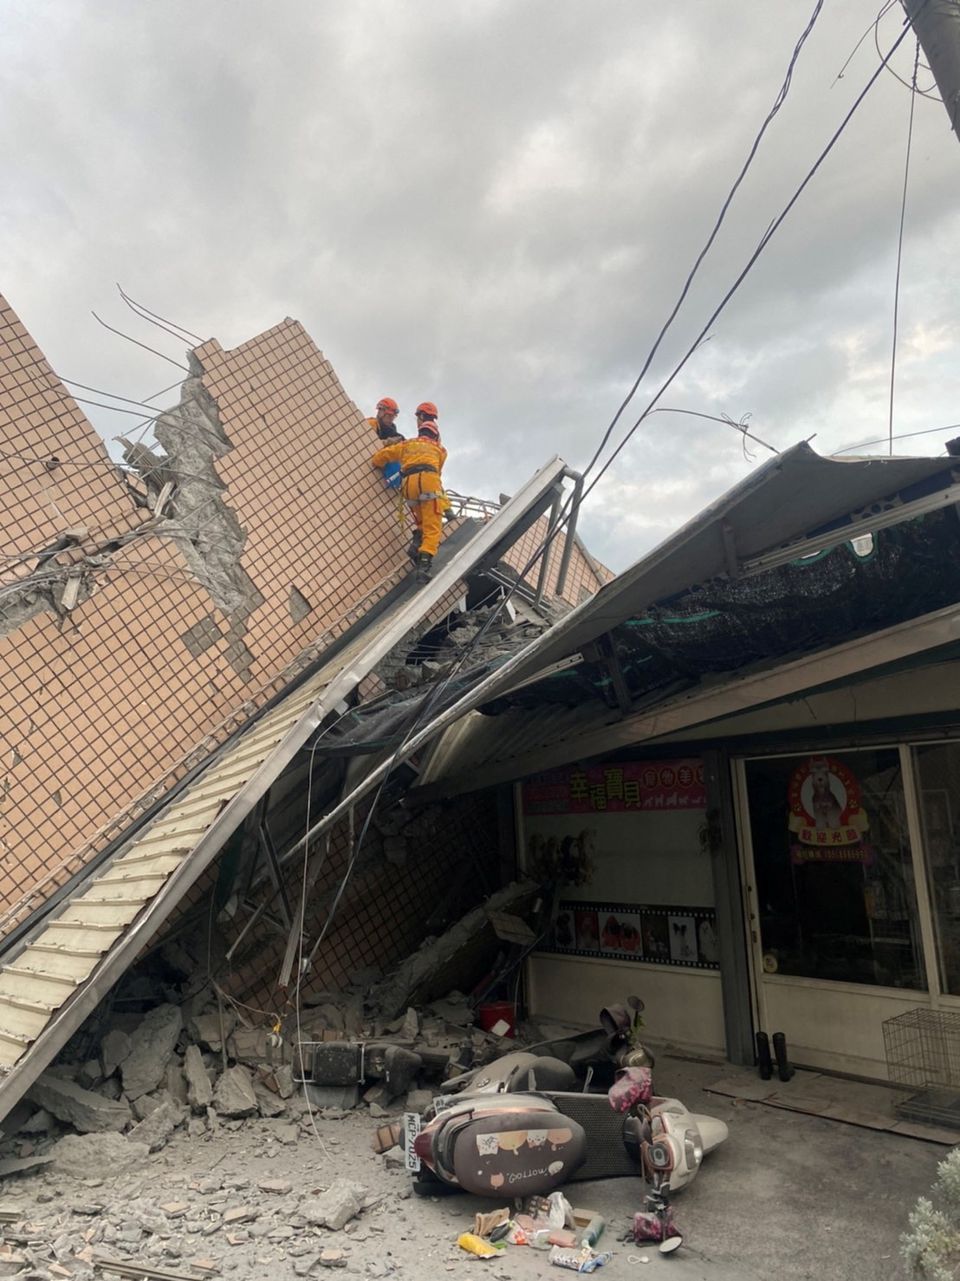 Firefighters work at the site where a building collapsed following a 6.8-magnitude earthquake, in Yuli, Hualien county, Taiwan September 18, 2022. Photo: Taiwan's 0918 Earthquake Central Emergency Operations Centre/Handout via REUTERS